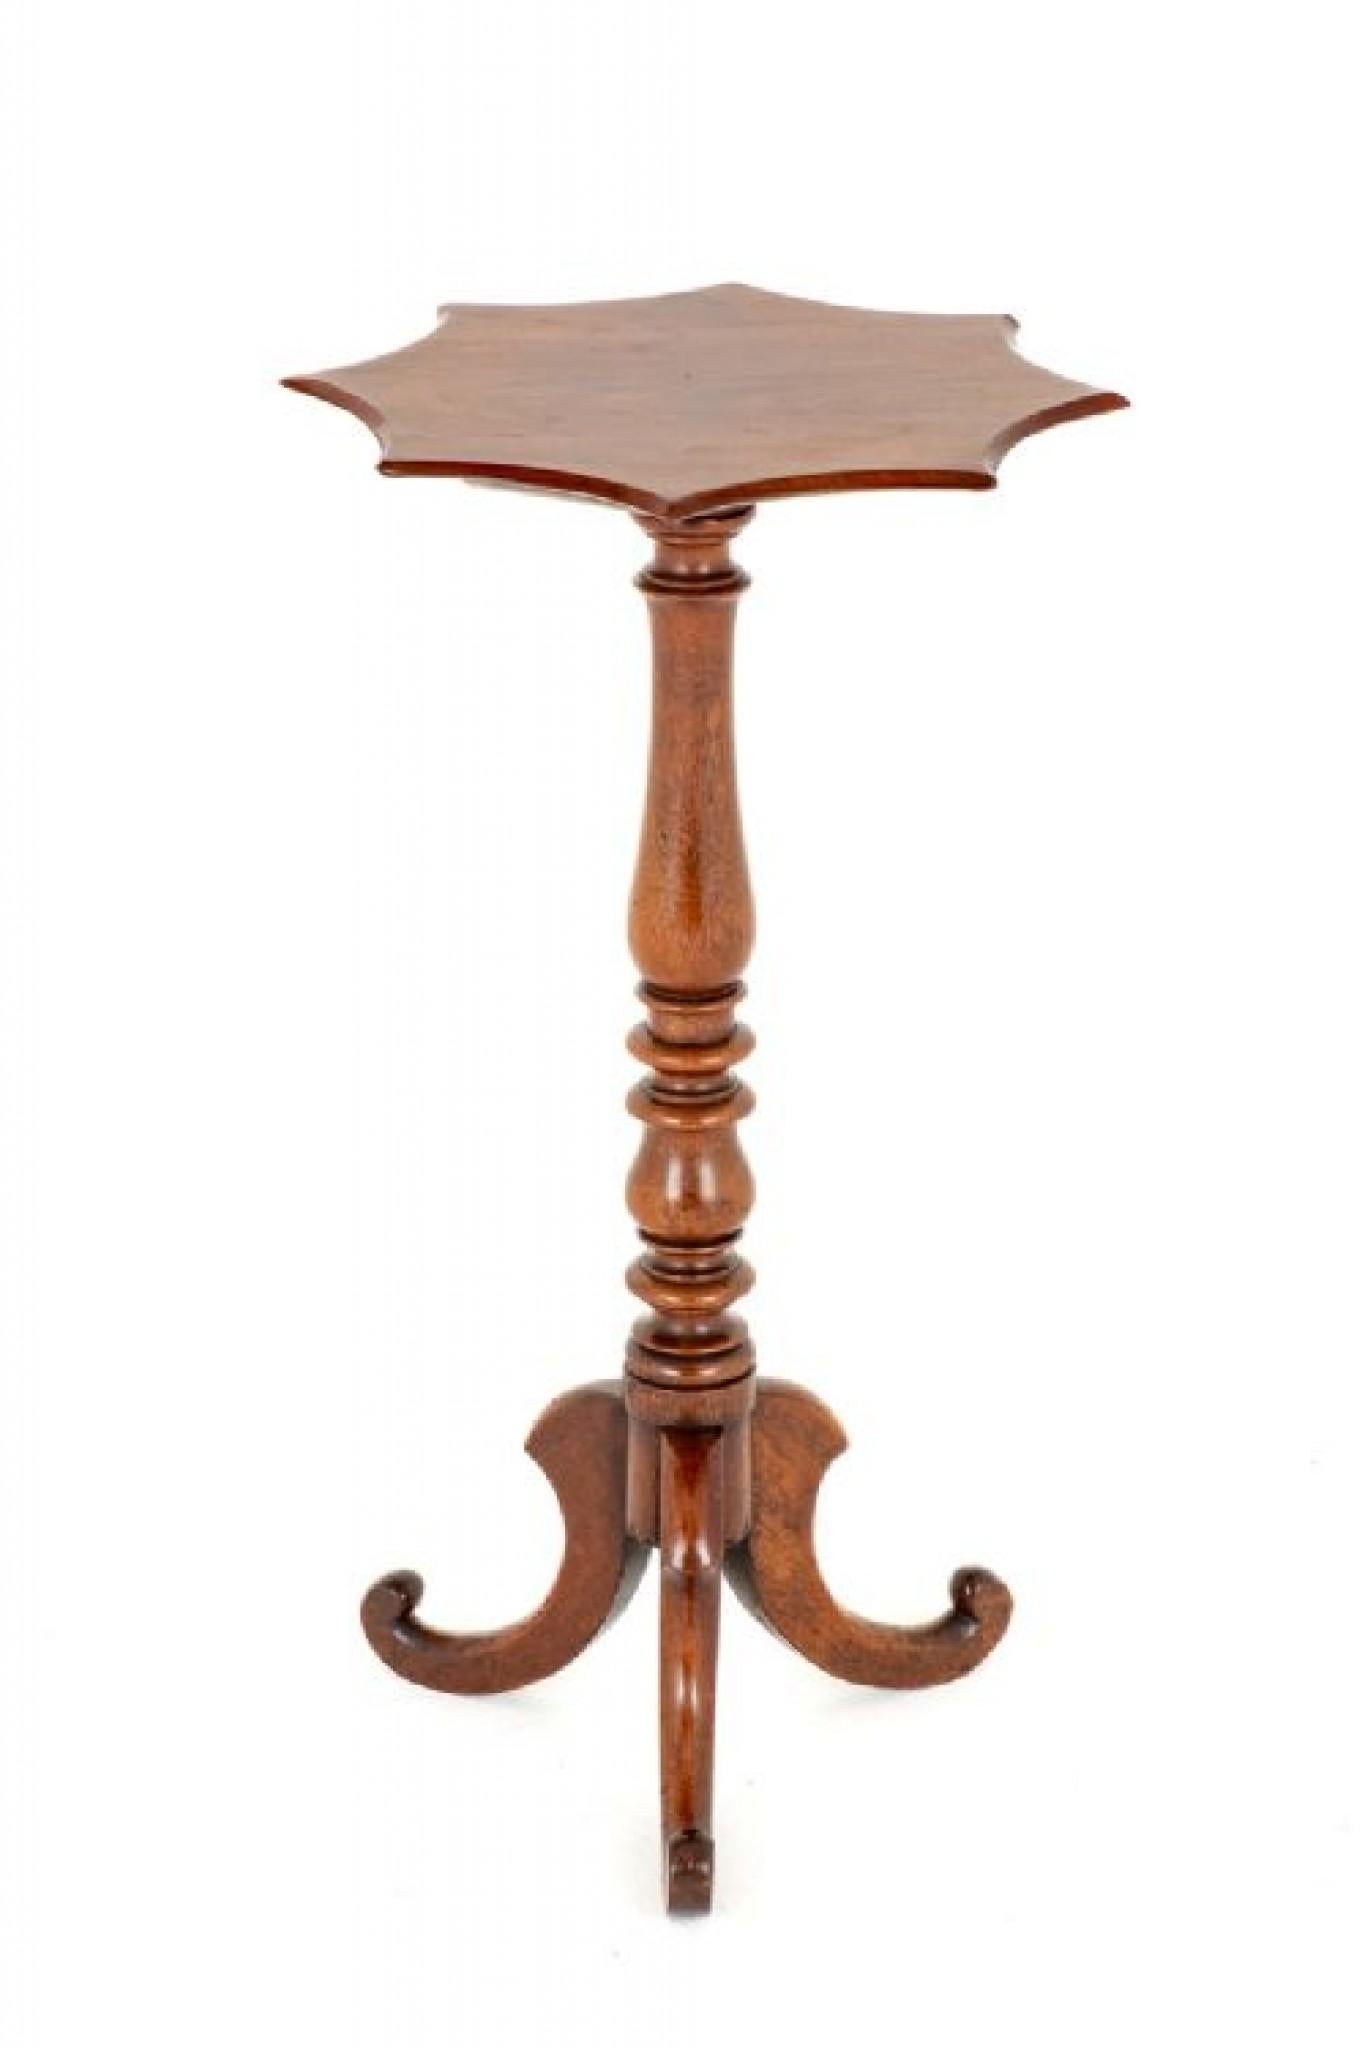 Victorian Mahogany Wine Table.
This Table Features a Rather Unusual Top in the Shape of a Star. The Column Being of a Ring Turned Form and Standing upon 3 Shaped Legs.
Presented in good condition
Circa 1860